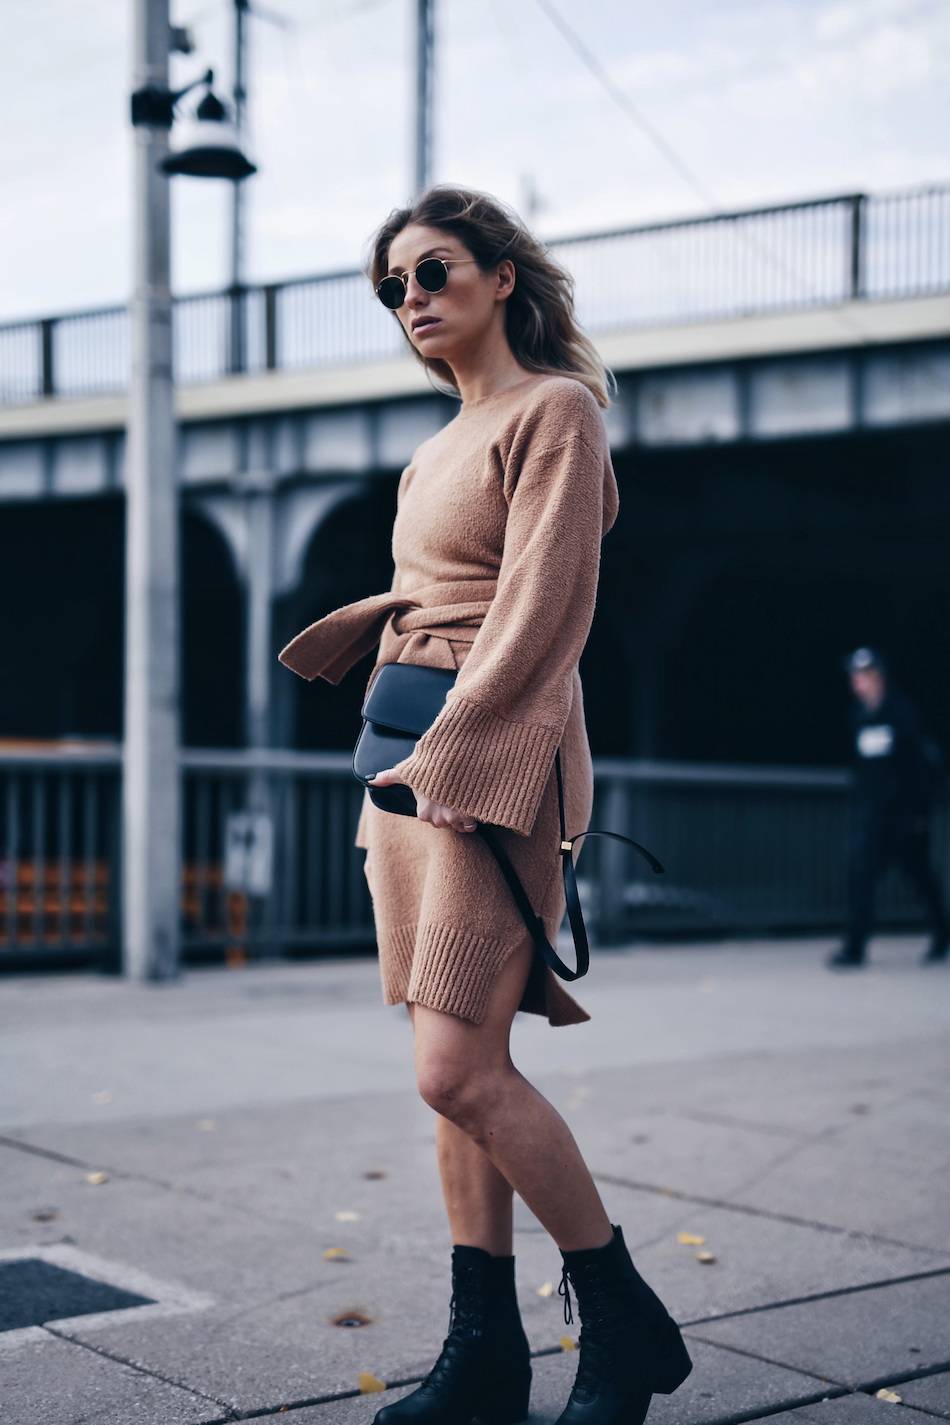 style-blogger-jill-lansky-of-the-august-diaries-wearing-3-1-phillip-lim-knit-dress-celine-black-box-bag-and-ld-tuttle-combat-boots-2